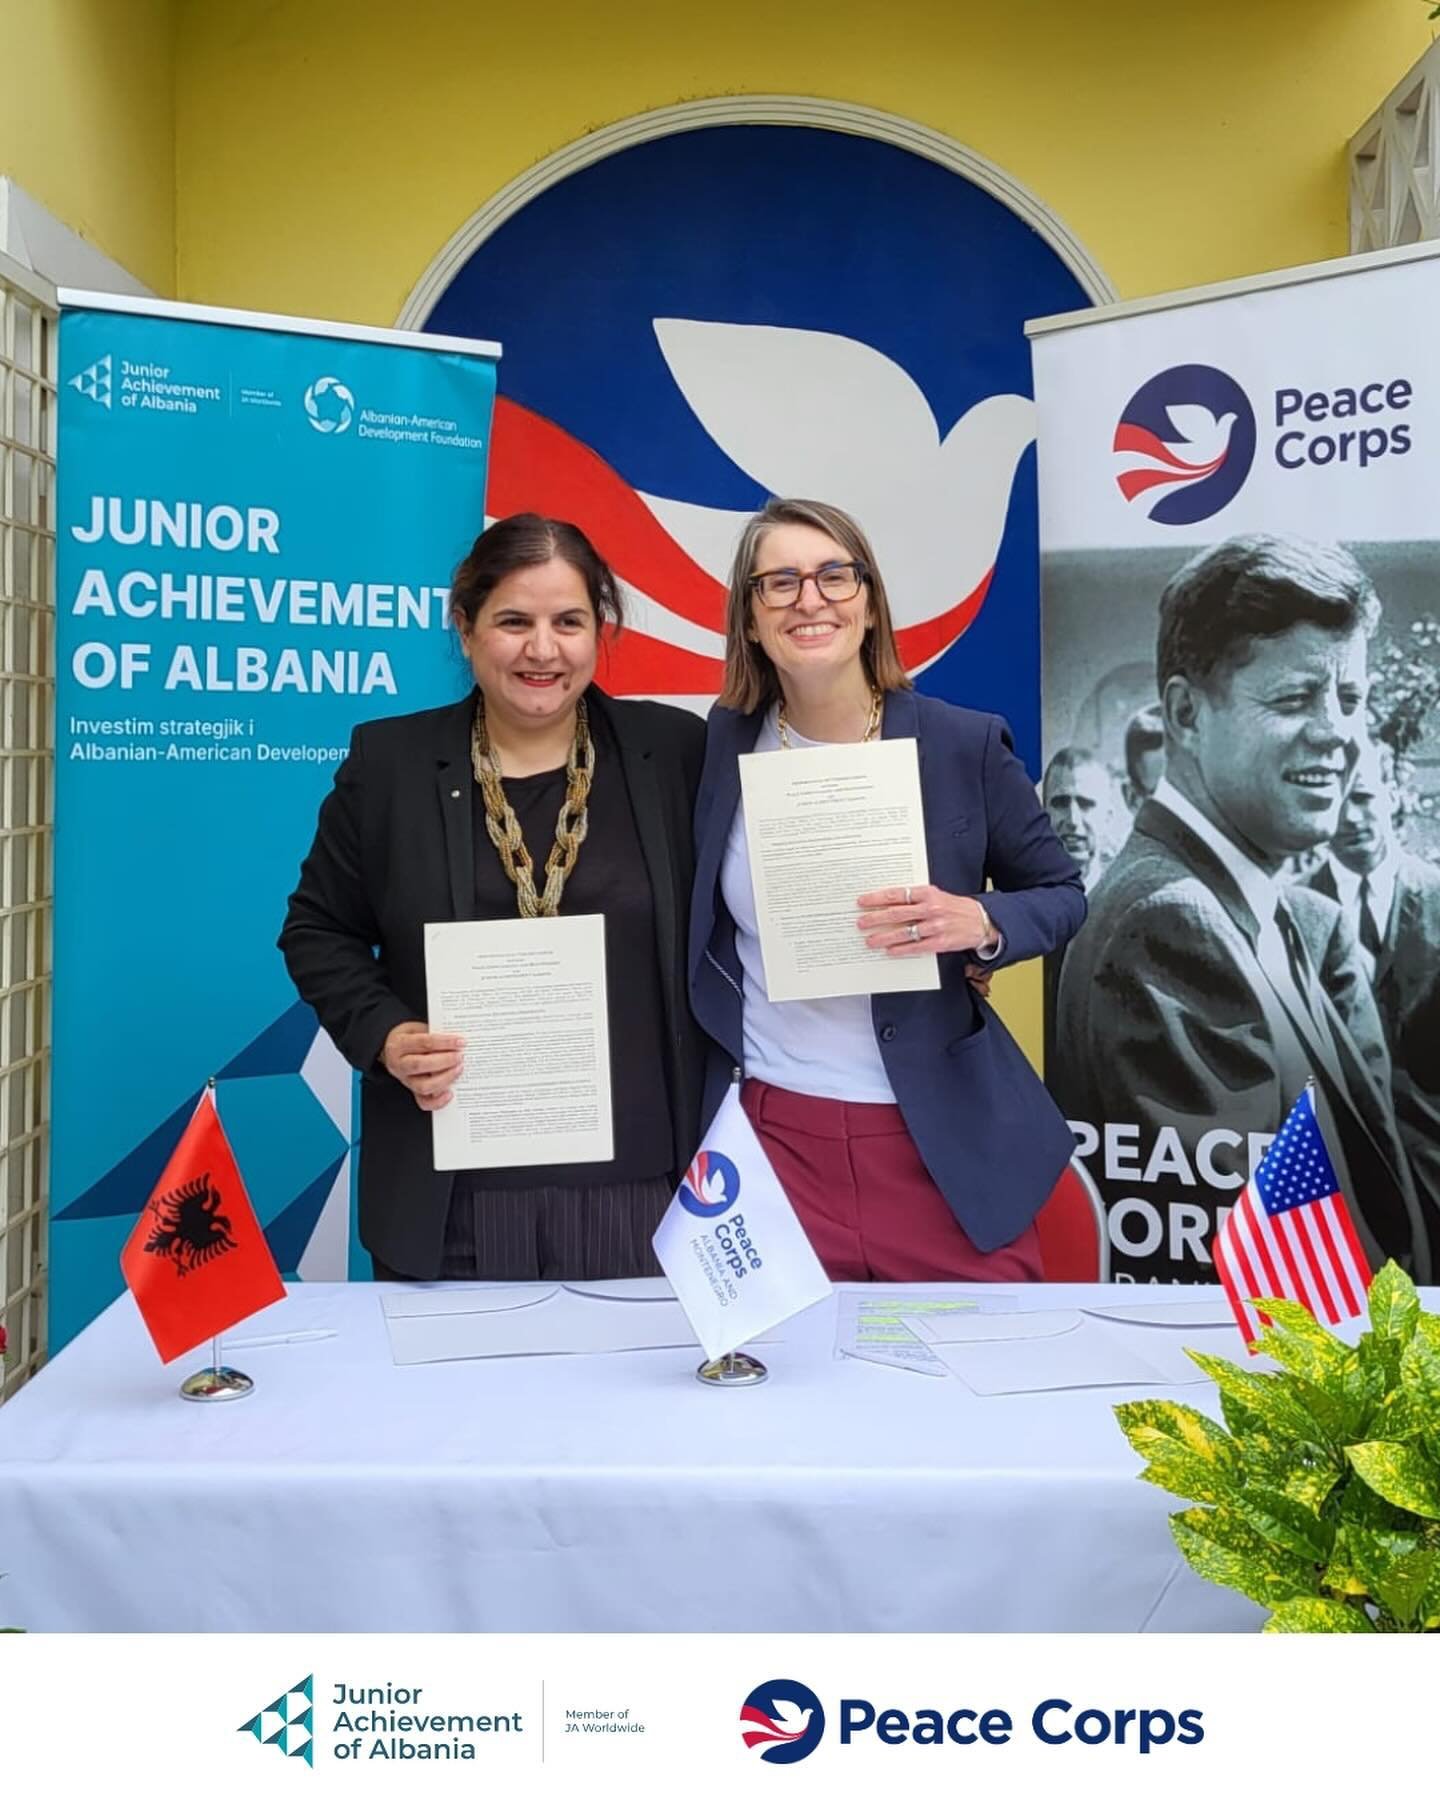 We are excited to share that Junior Achievement of Albania has signed a Memorandum of Understanding with Peace Corps in Albania! This cooperation agreement, signed by our CEO Blerina Guga and Peace Corps Country Director Megan Wilson, aims to train P